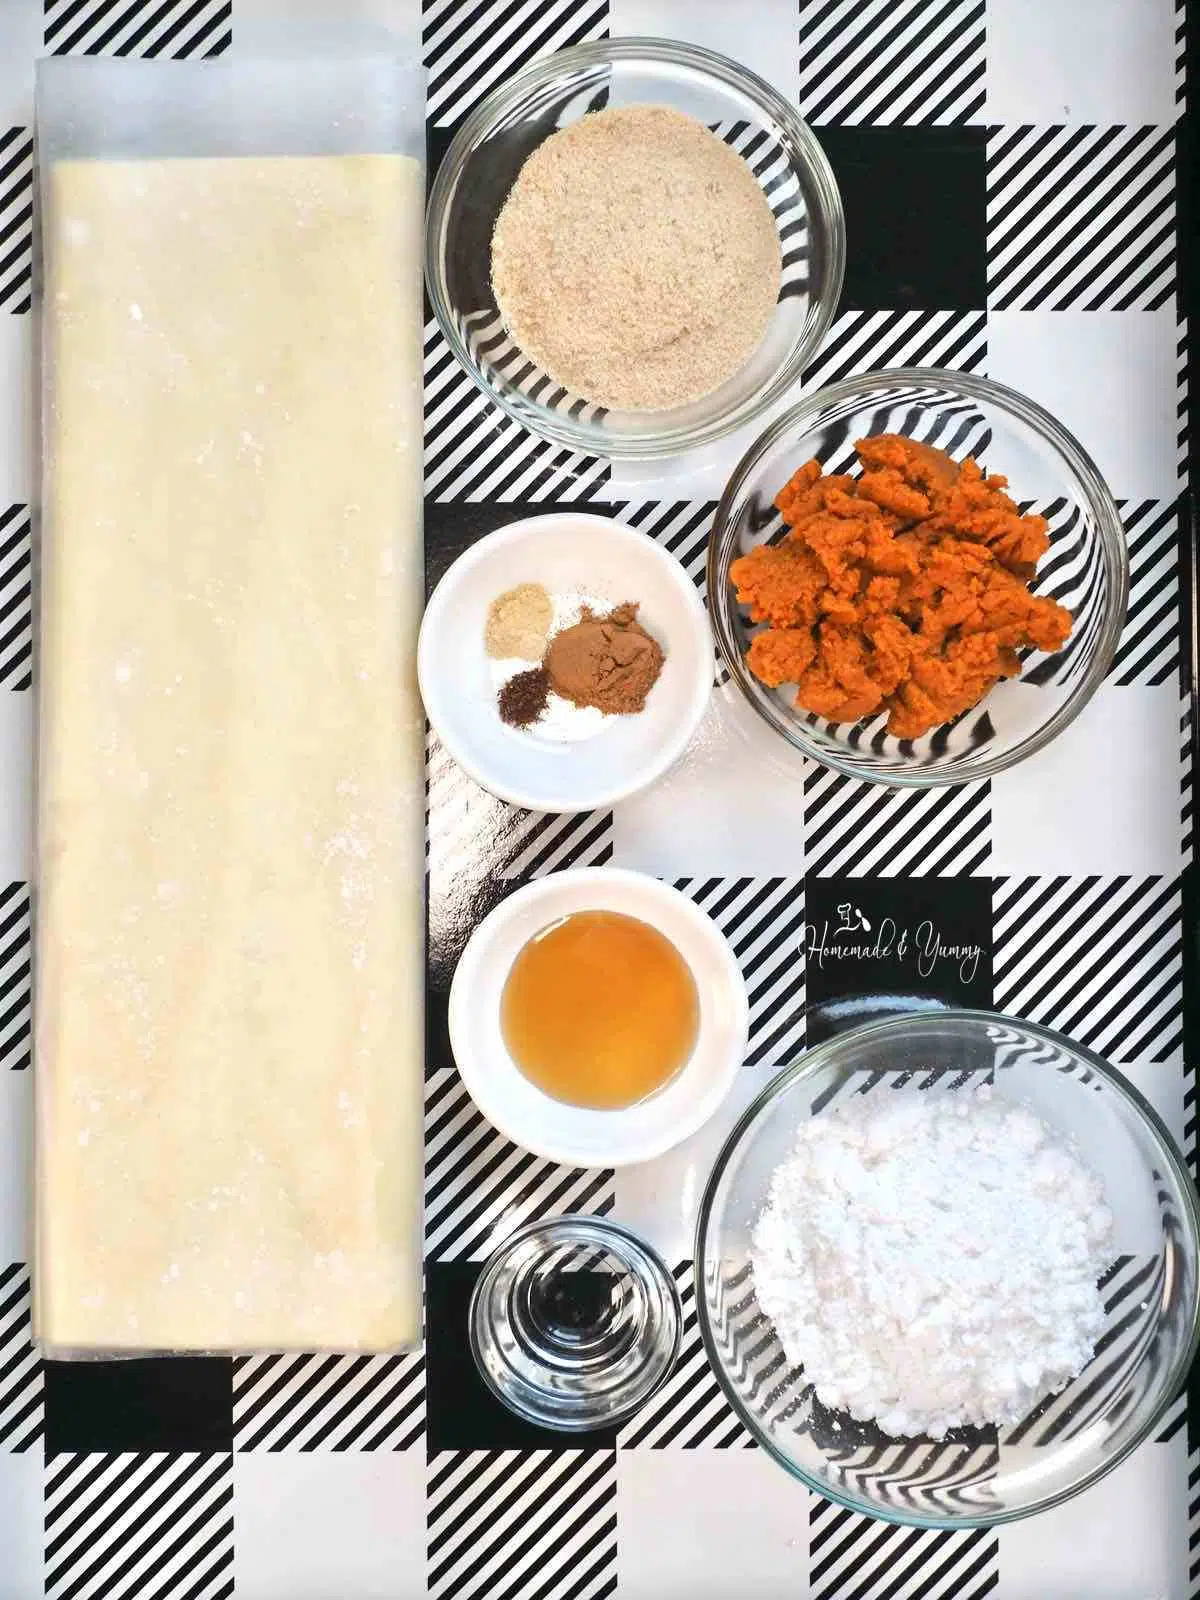 Ingredients to make pumpkin rolls with puff pastry.